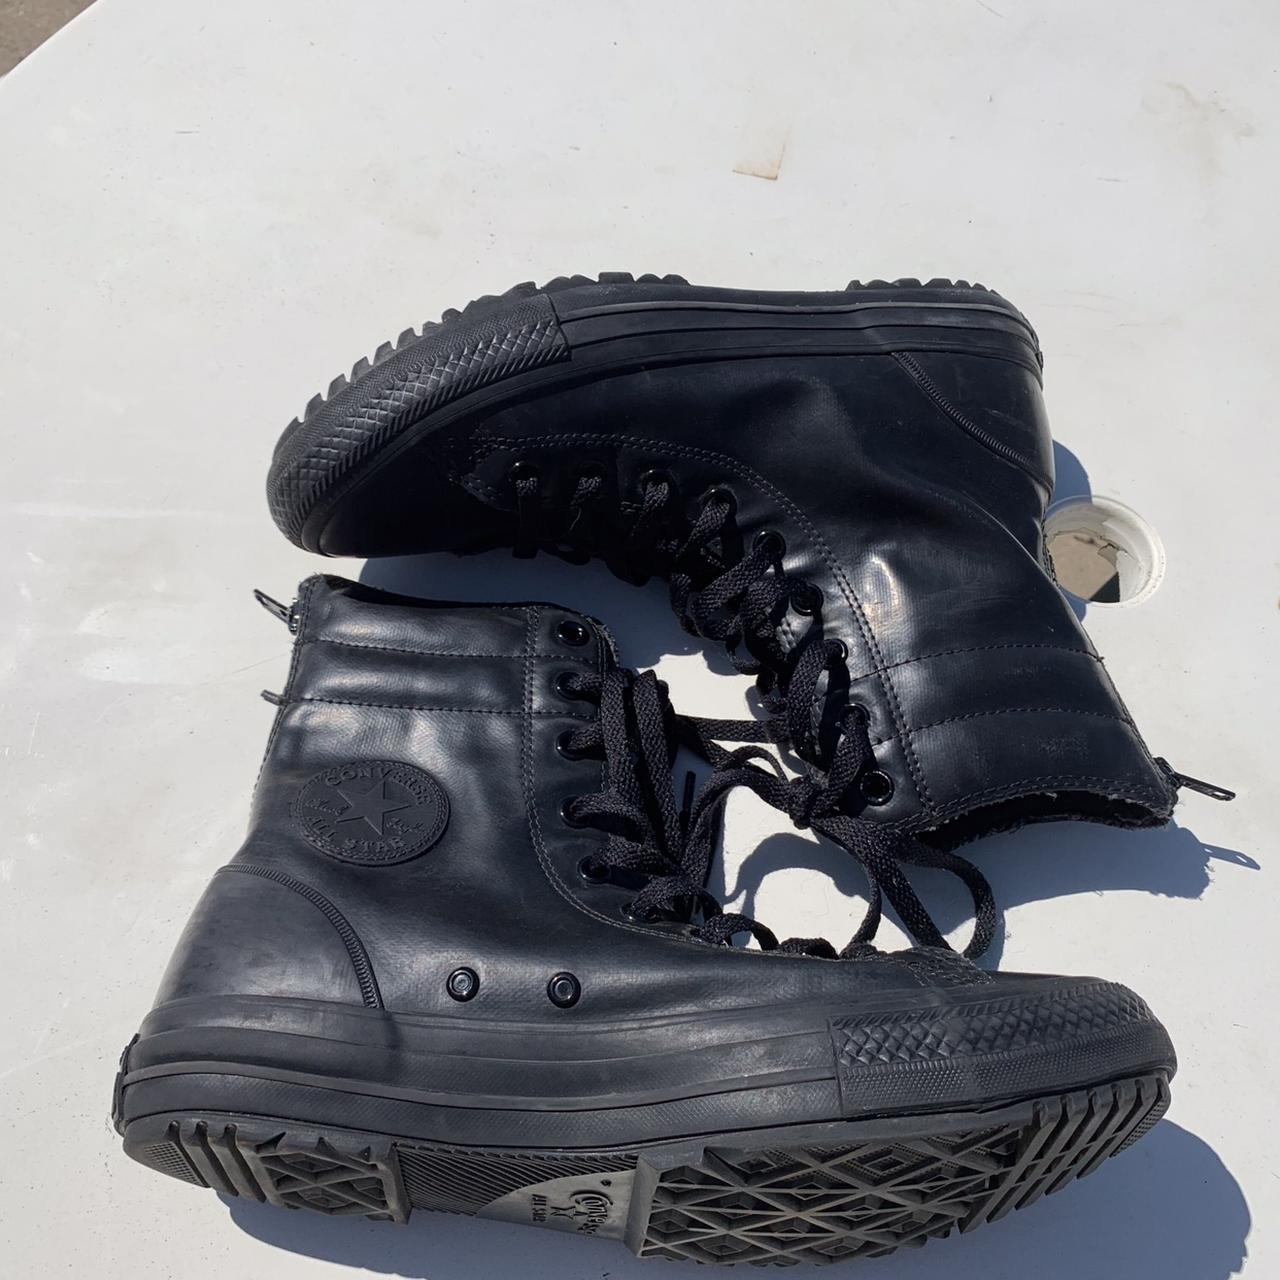 Converse military boot